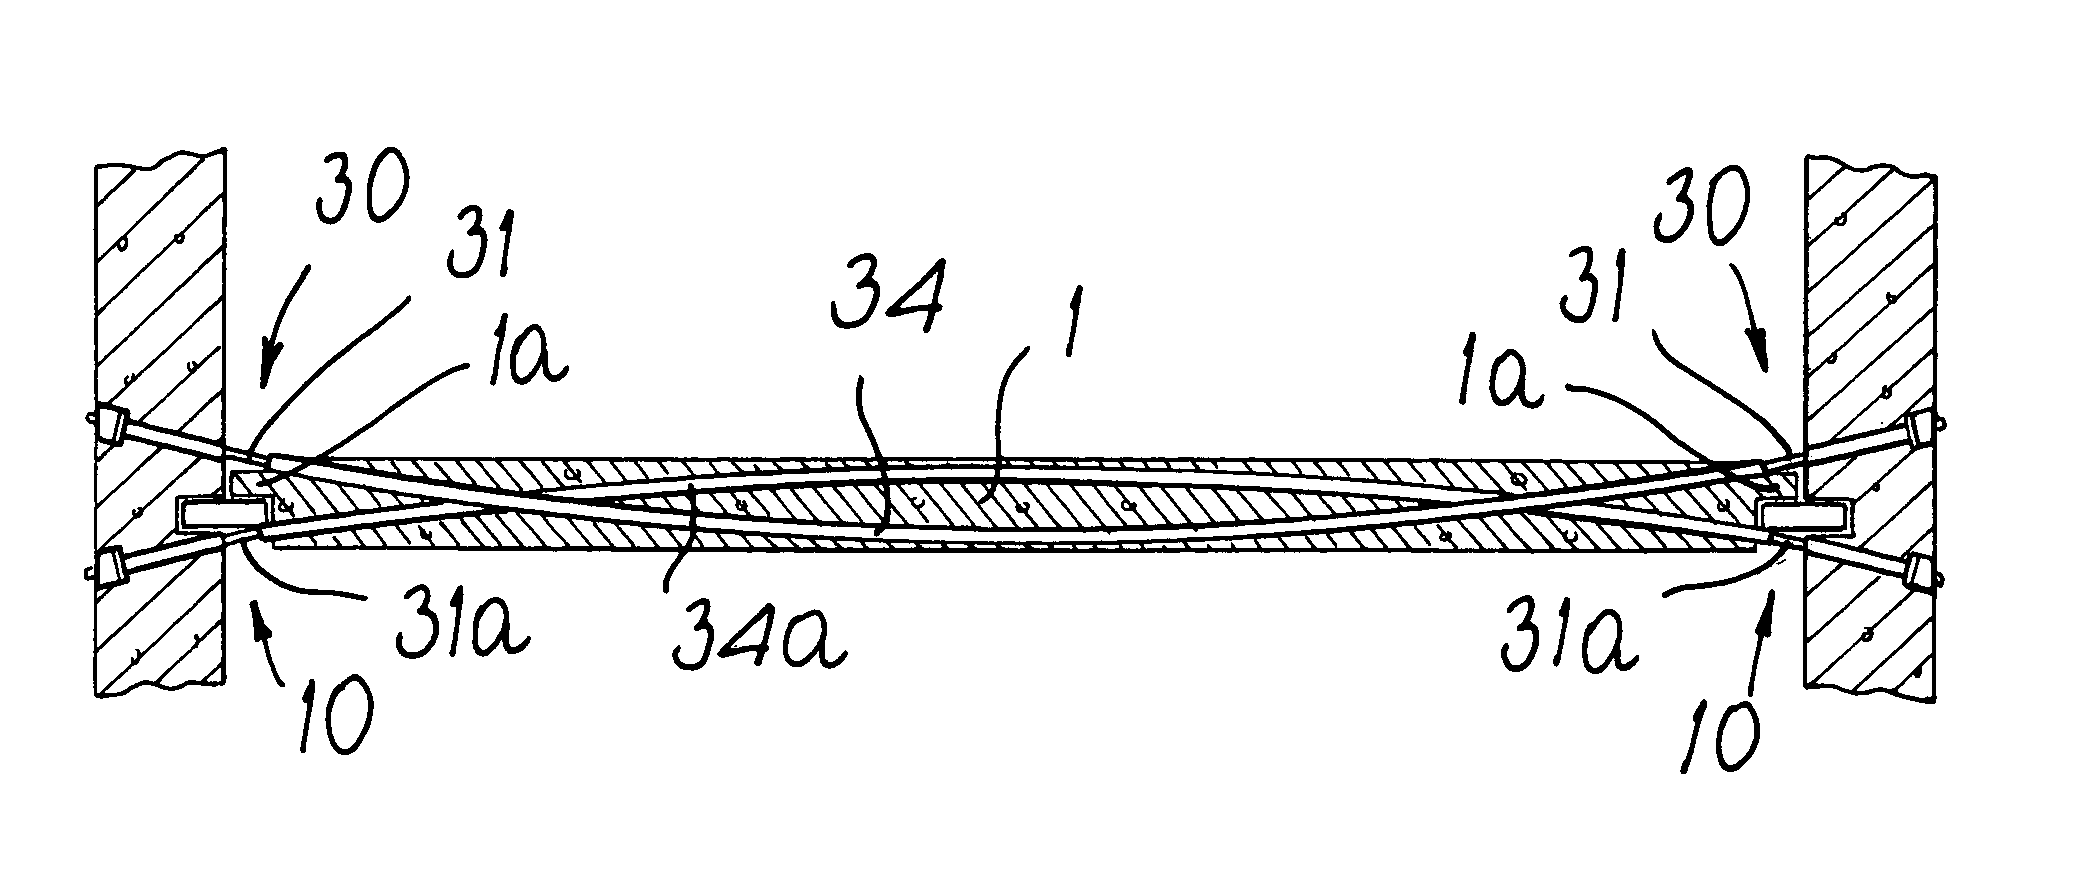 Device for connecting a beam to pillars or similar supporting structural elements for erecting buildings